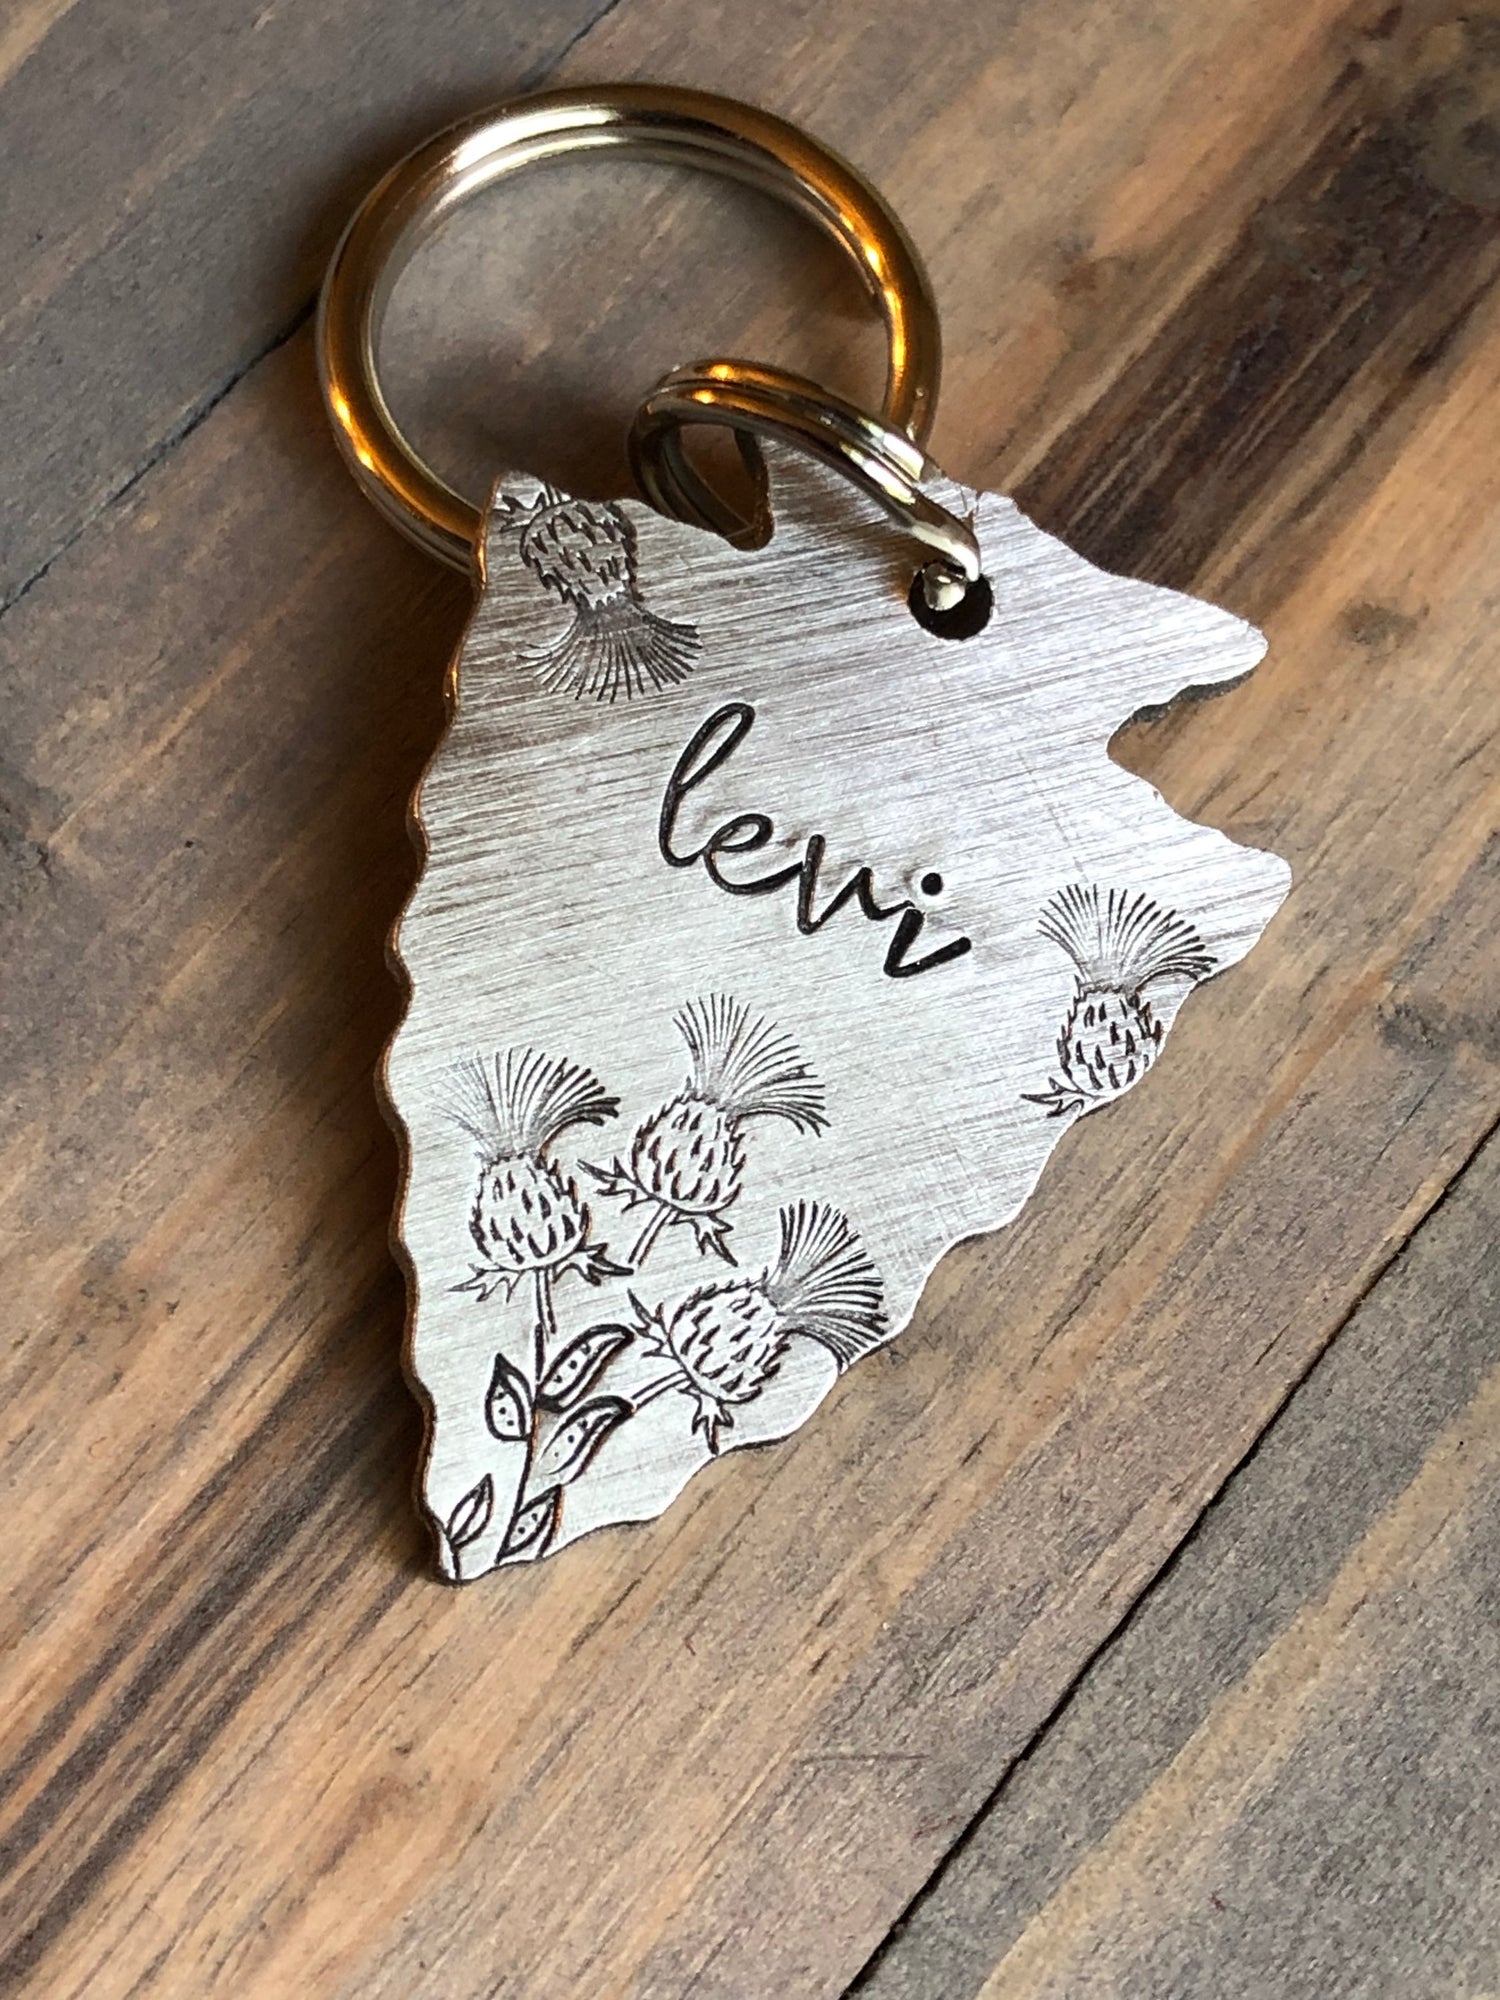 Custom Arrowhead Dog Tag with Thistle, Hand Stamped Pet ID, Personalized Dog Tag for Dog, Arrowhead Dog Tag, Scottish Thistle with Bee